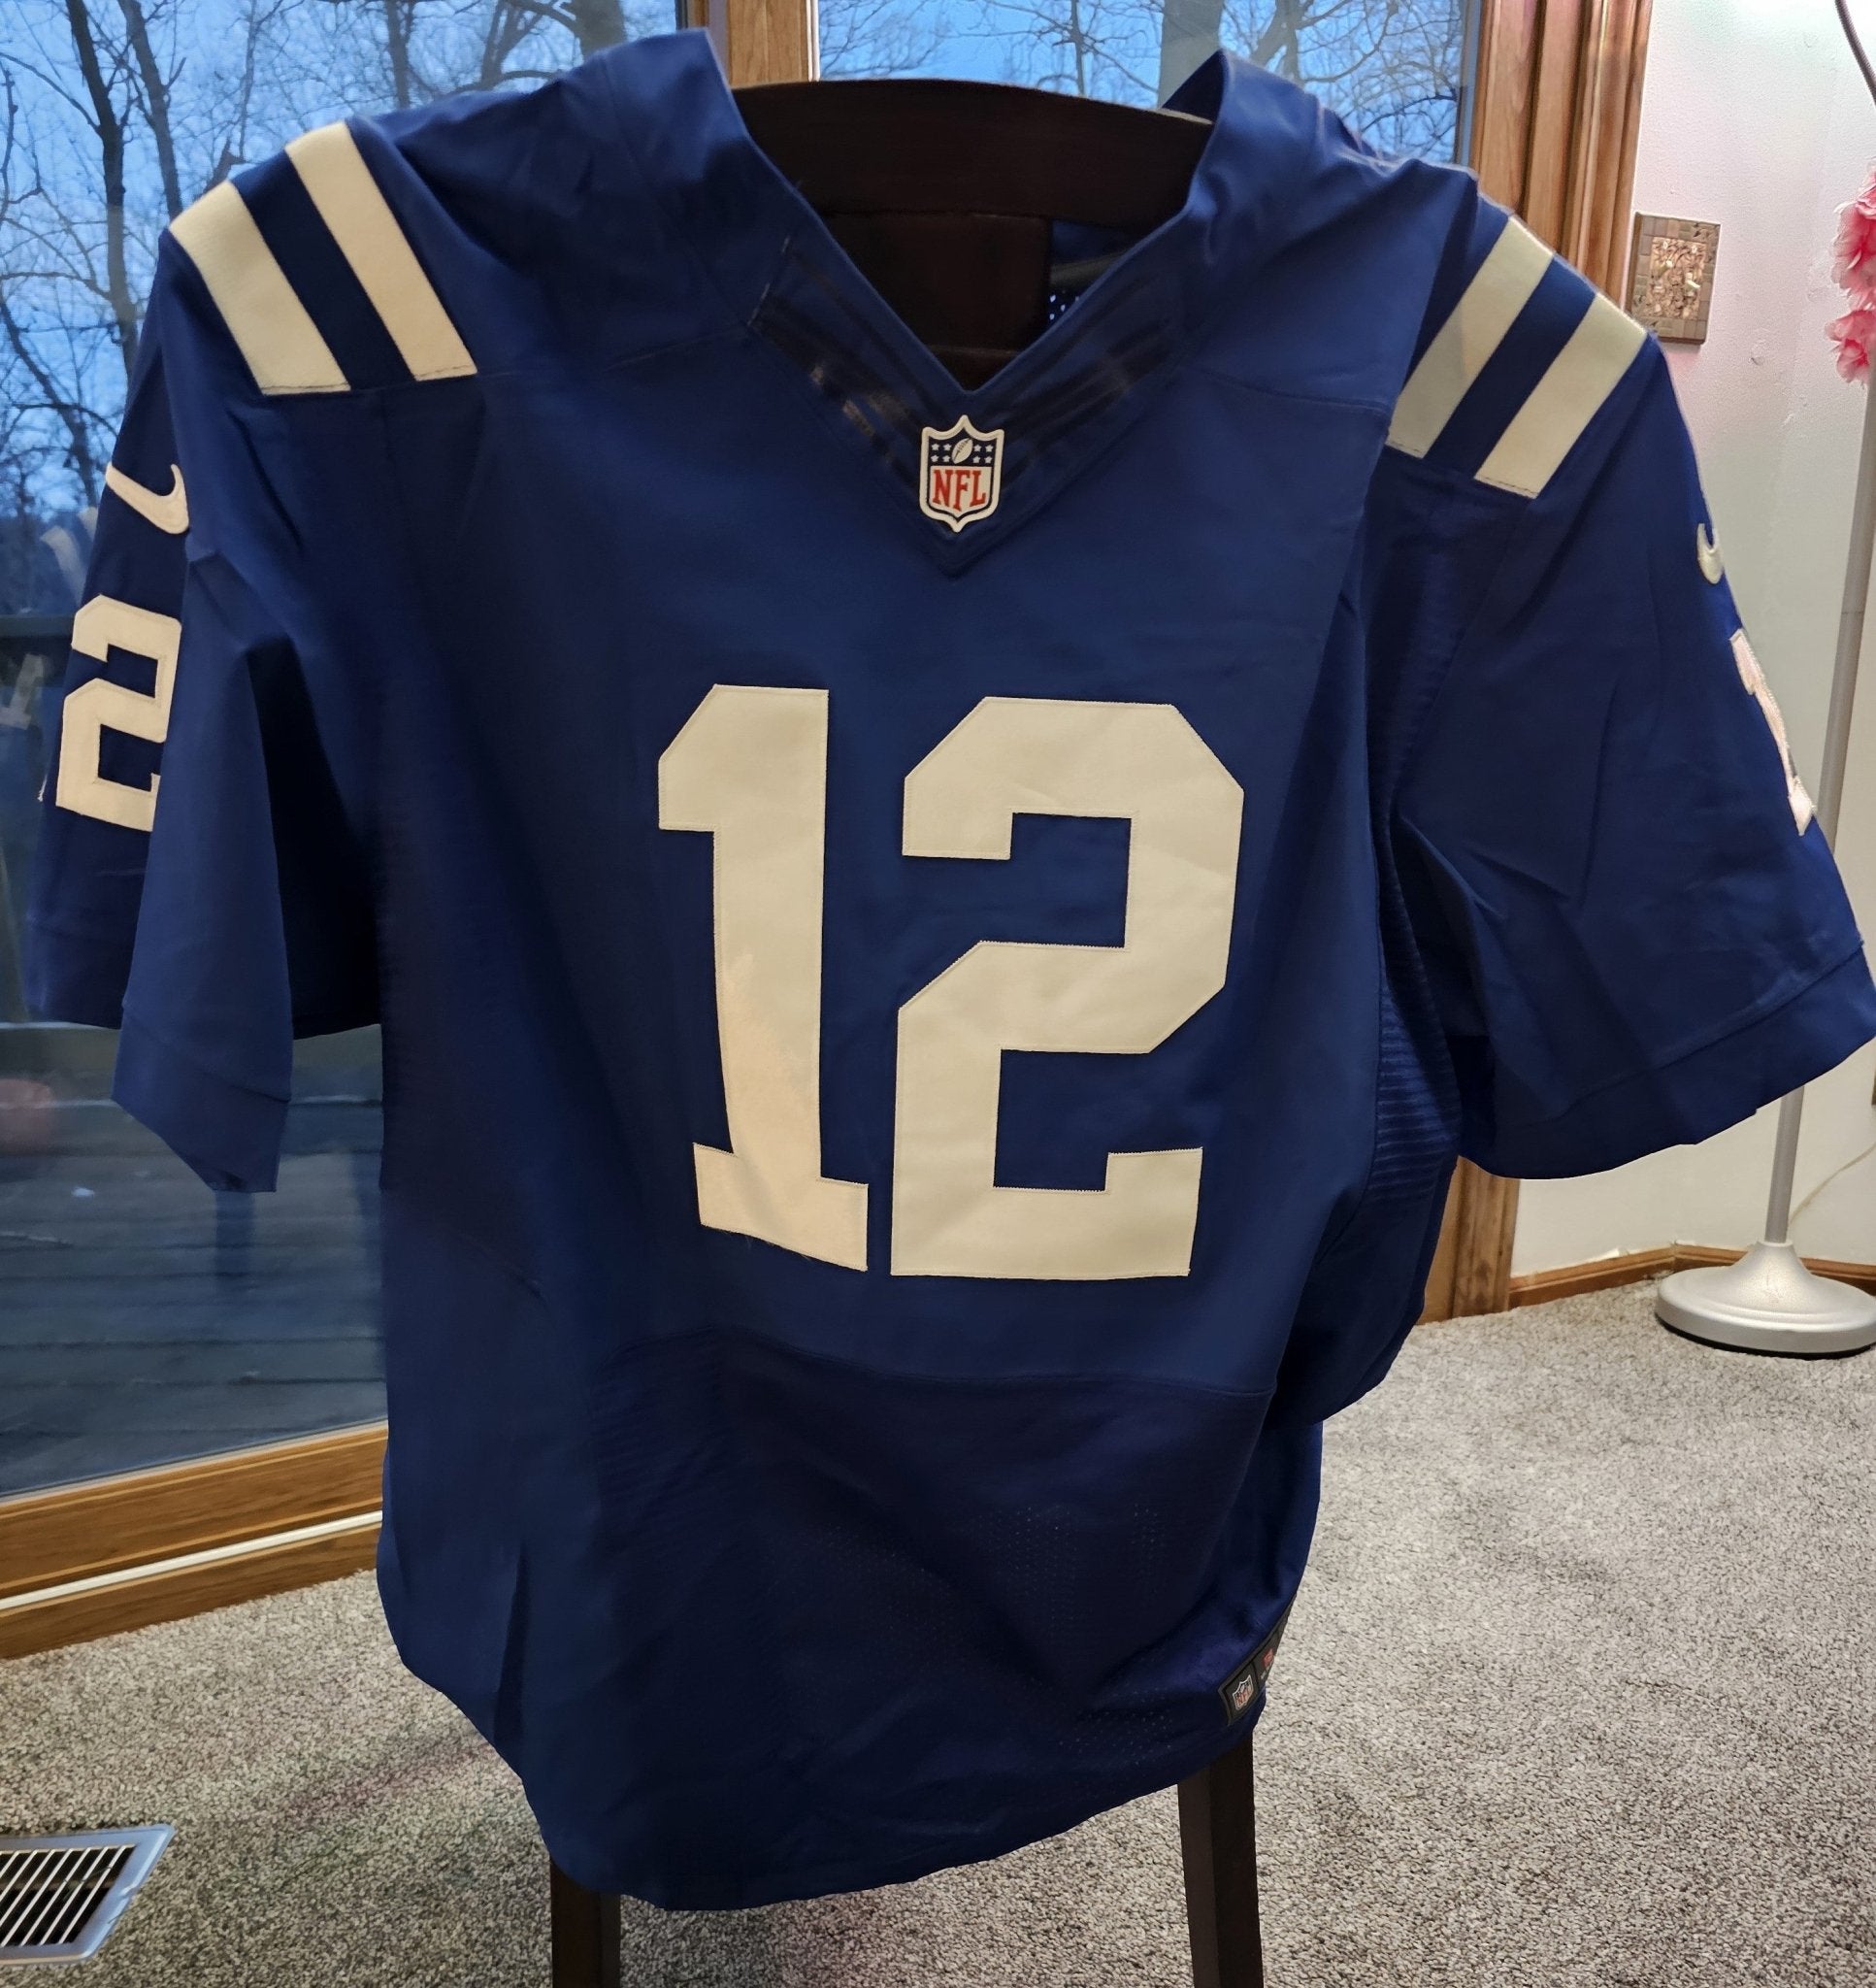 Nike - NFL | Men's Nike On Field Andrew Luck Indianapolis Colts Sewn Authentic Jersey | sz. 52 - NFL Jersey - Steady Bunny Shop